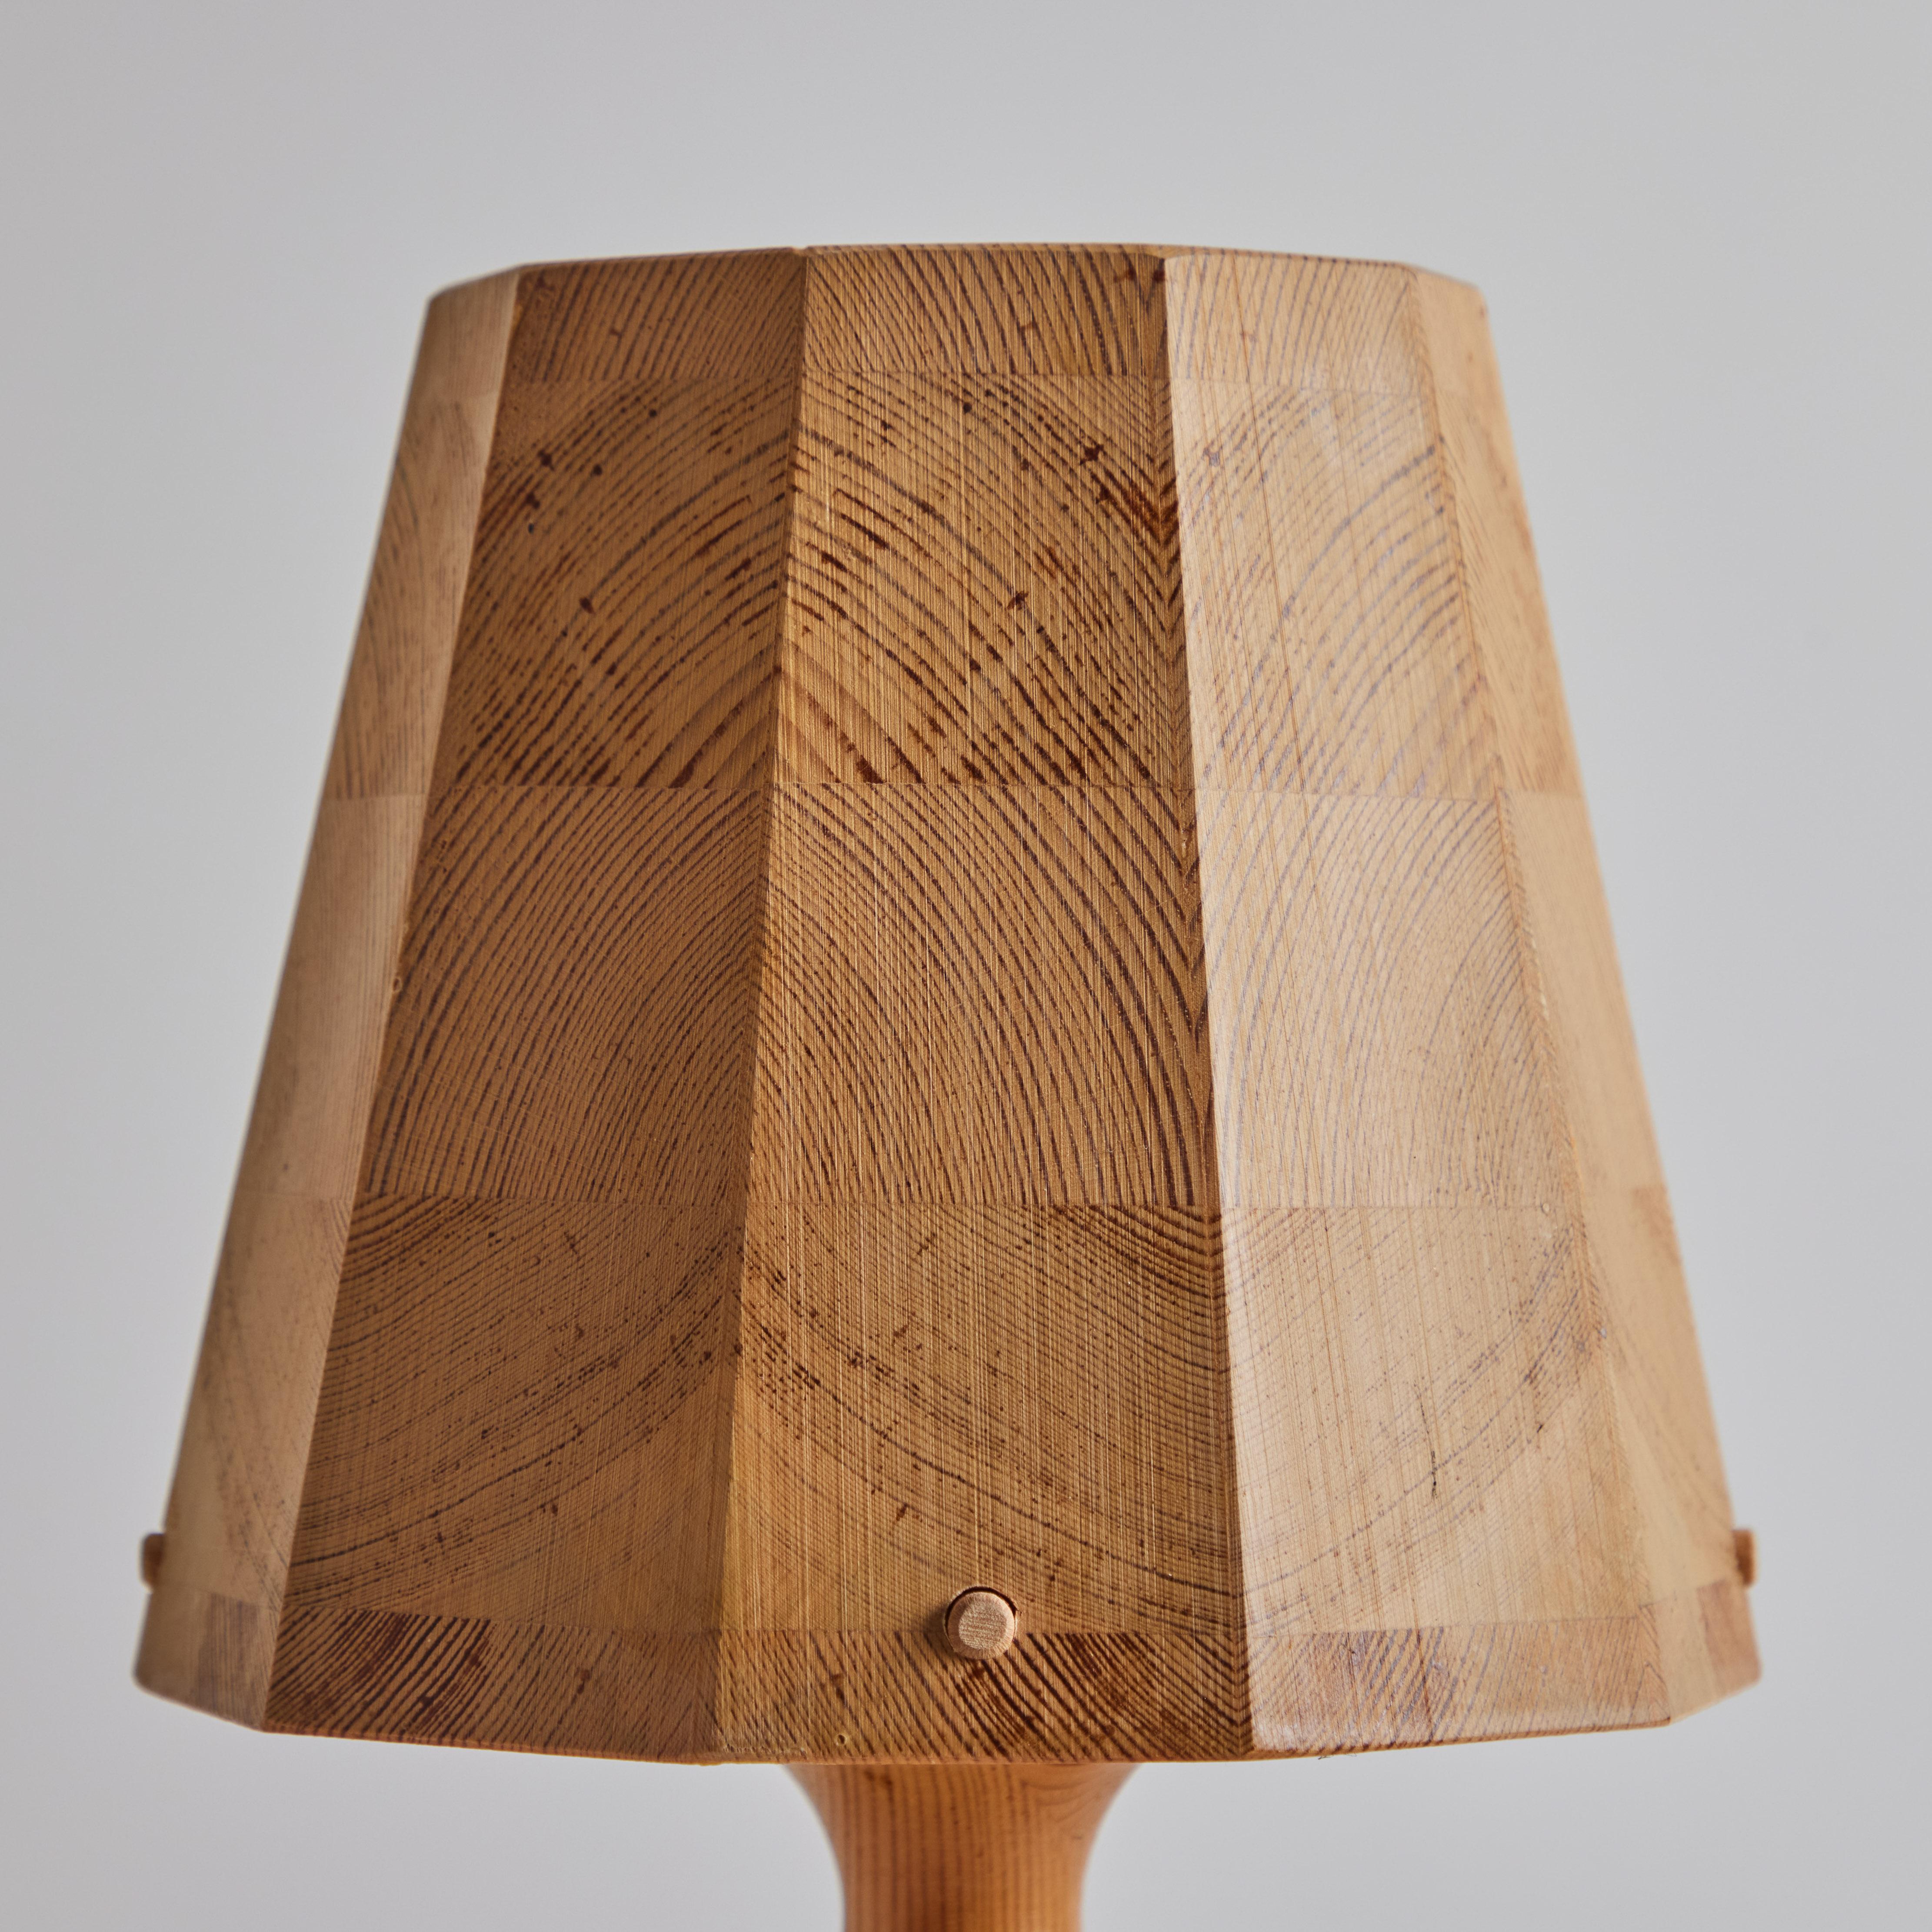 Pair of 1960s Wood Table Lamps Attributed to Hans-Agne Jakobsson for AB Ellysett For Sale 12